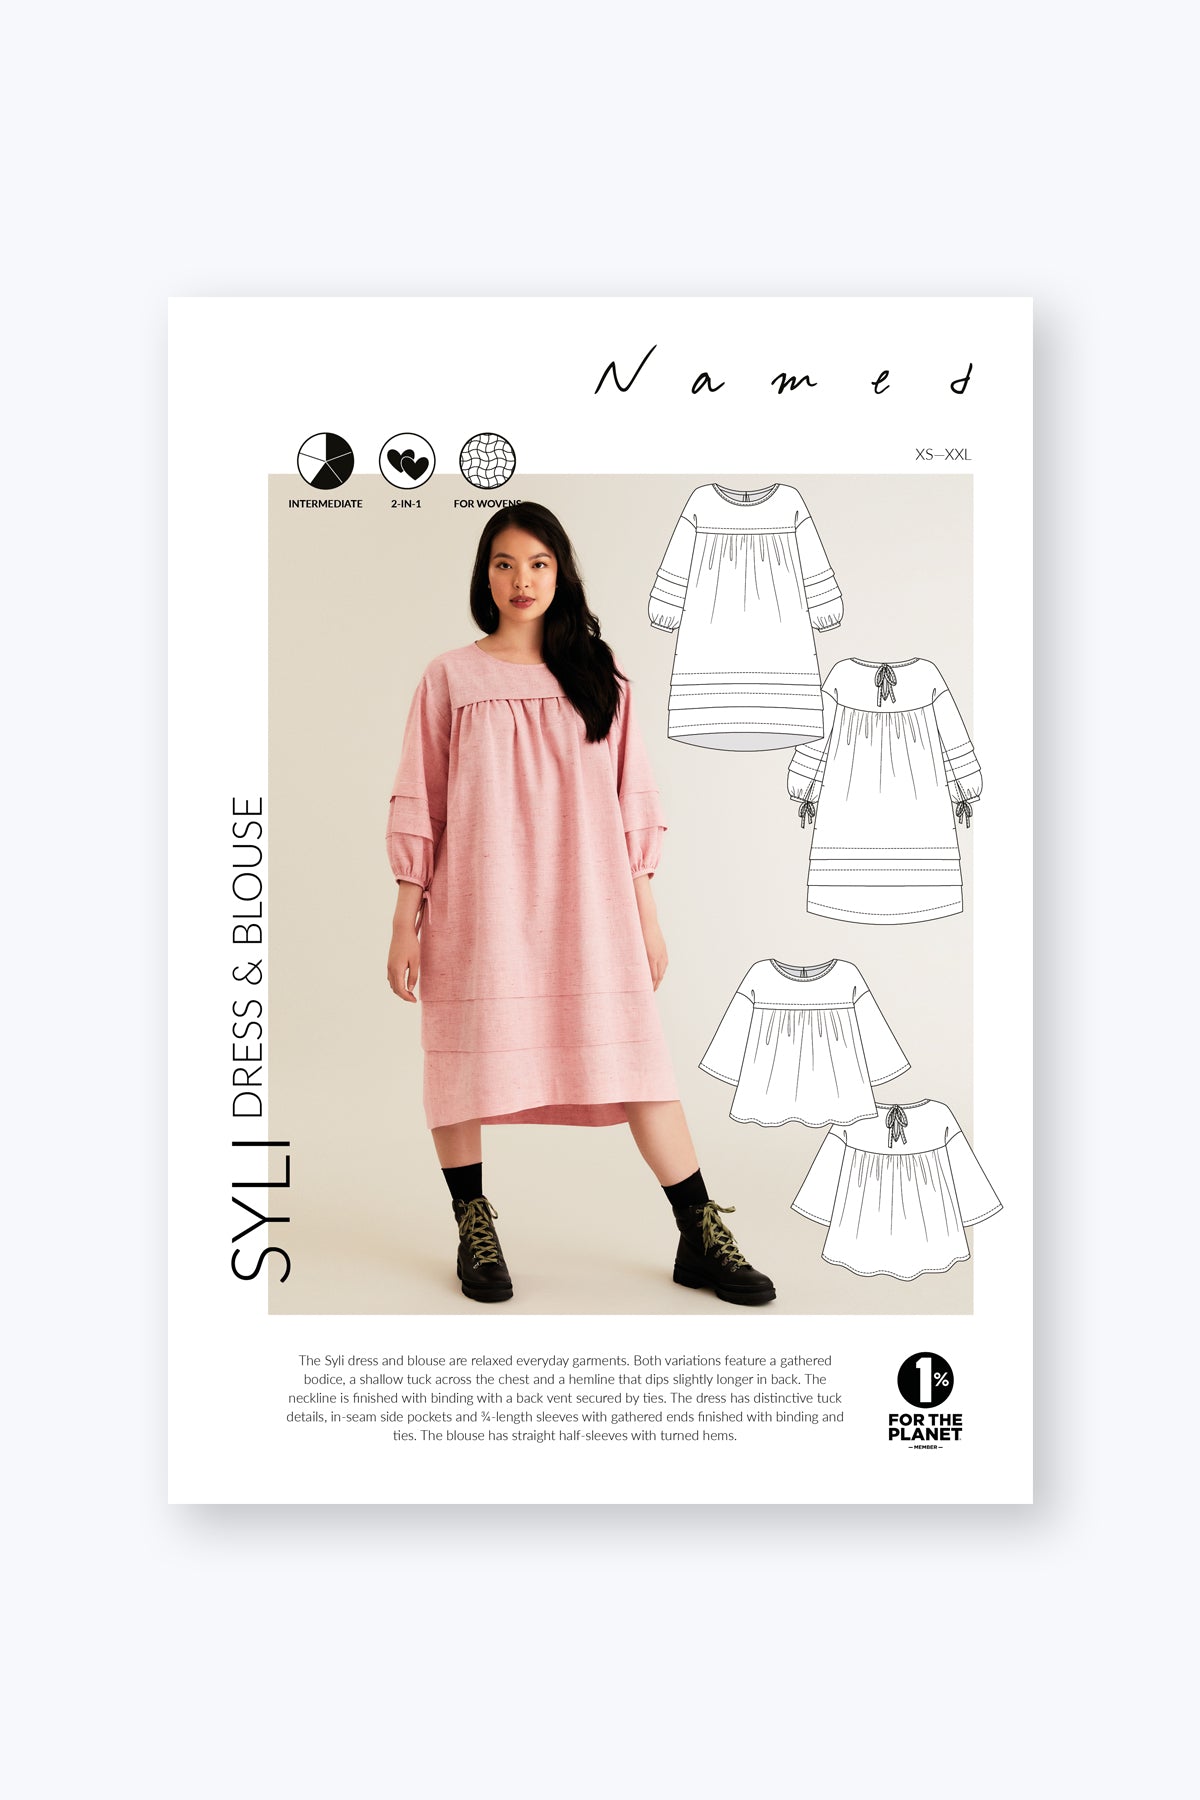 Named Syli Dress and Blouse